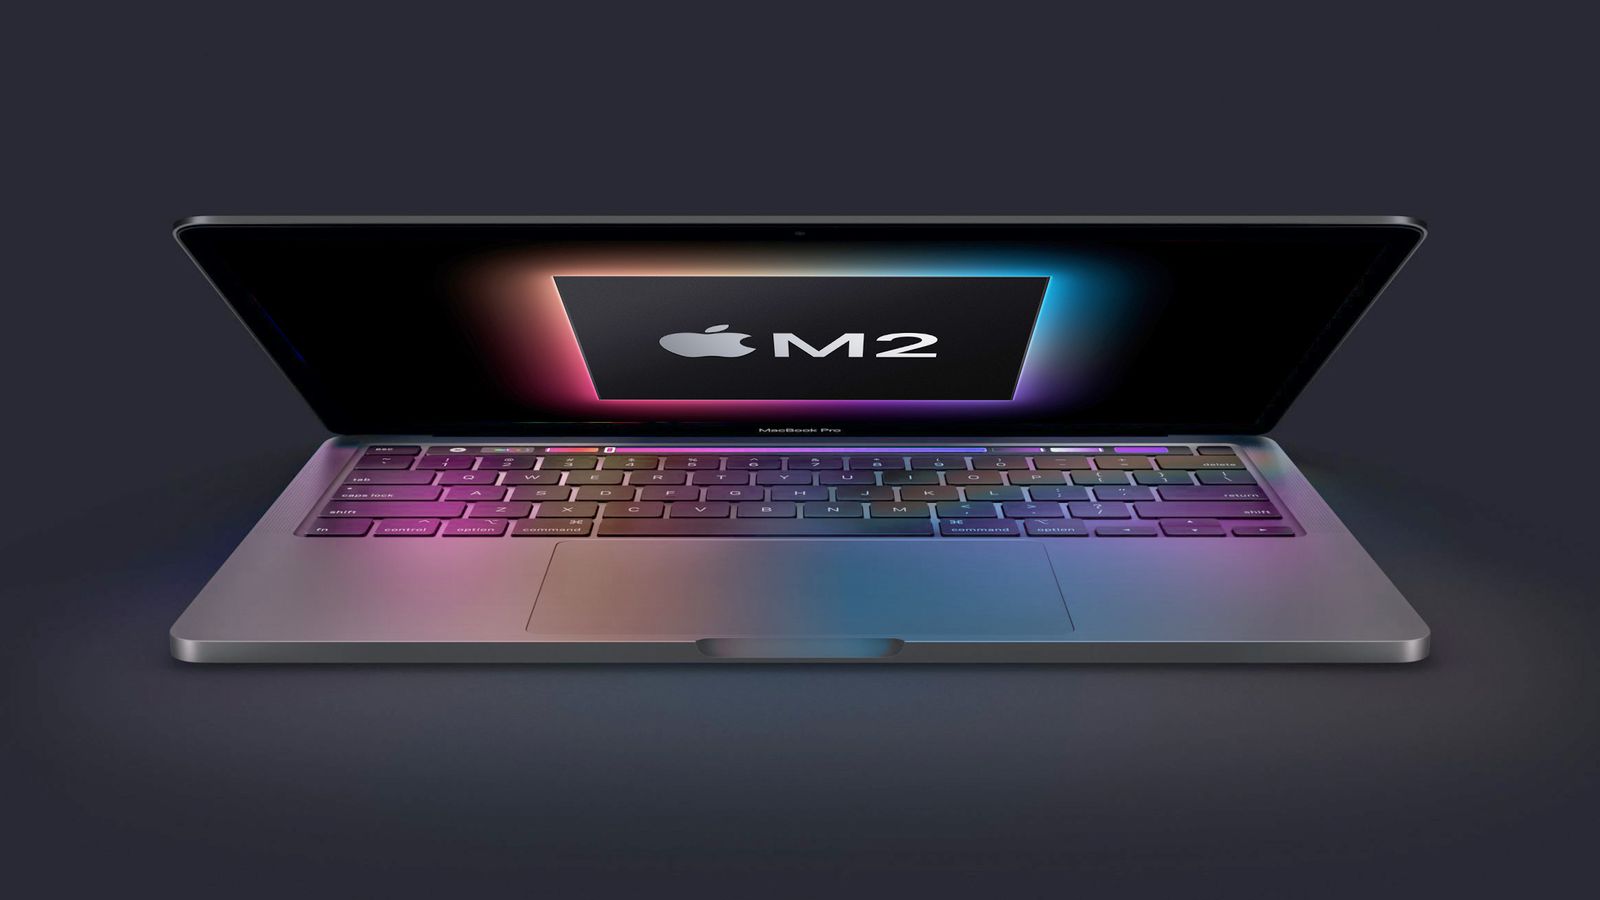 Base 13-Inch MacBook Pro With M2 Chip Has Significantly Slower SSD Speeds - MacRumors